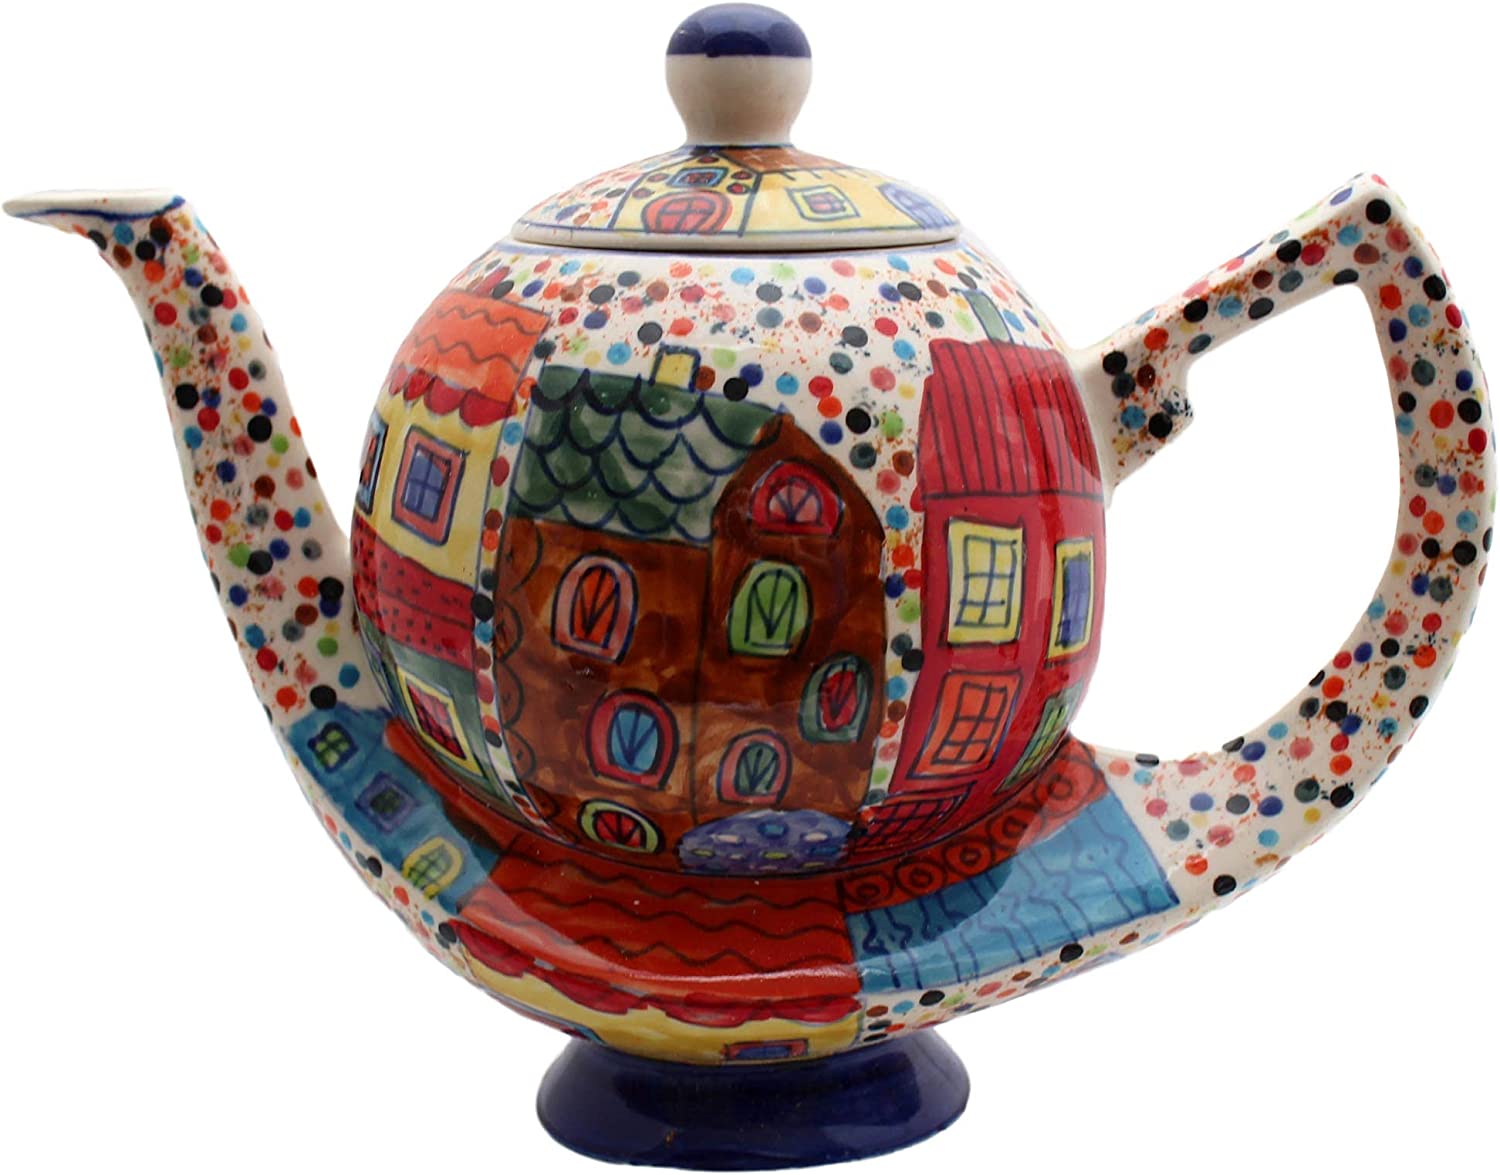 Gall&Zick Aladin Village Ceramic Teapot Hand-Painted Multi-Coloured